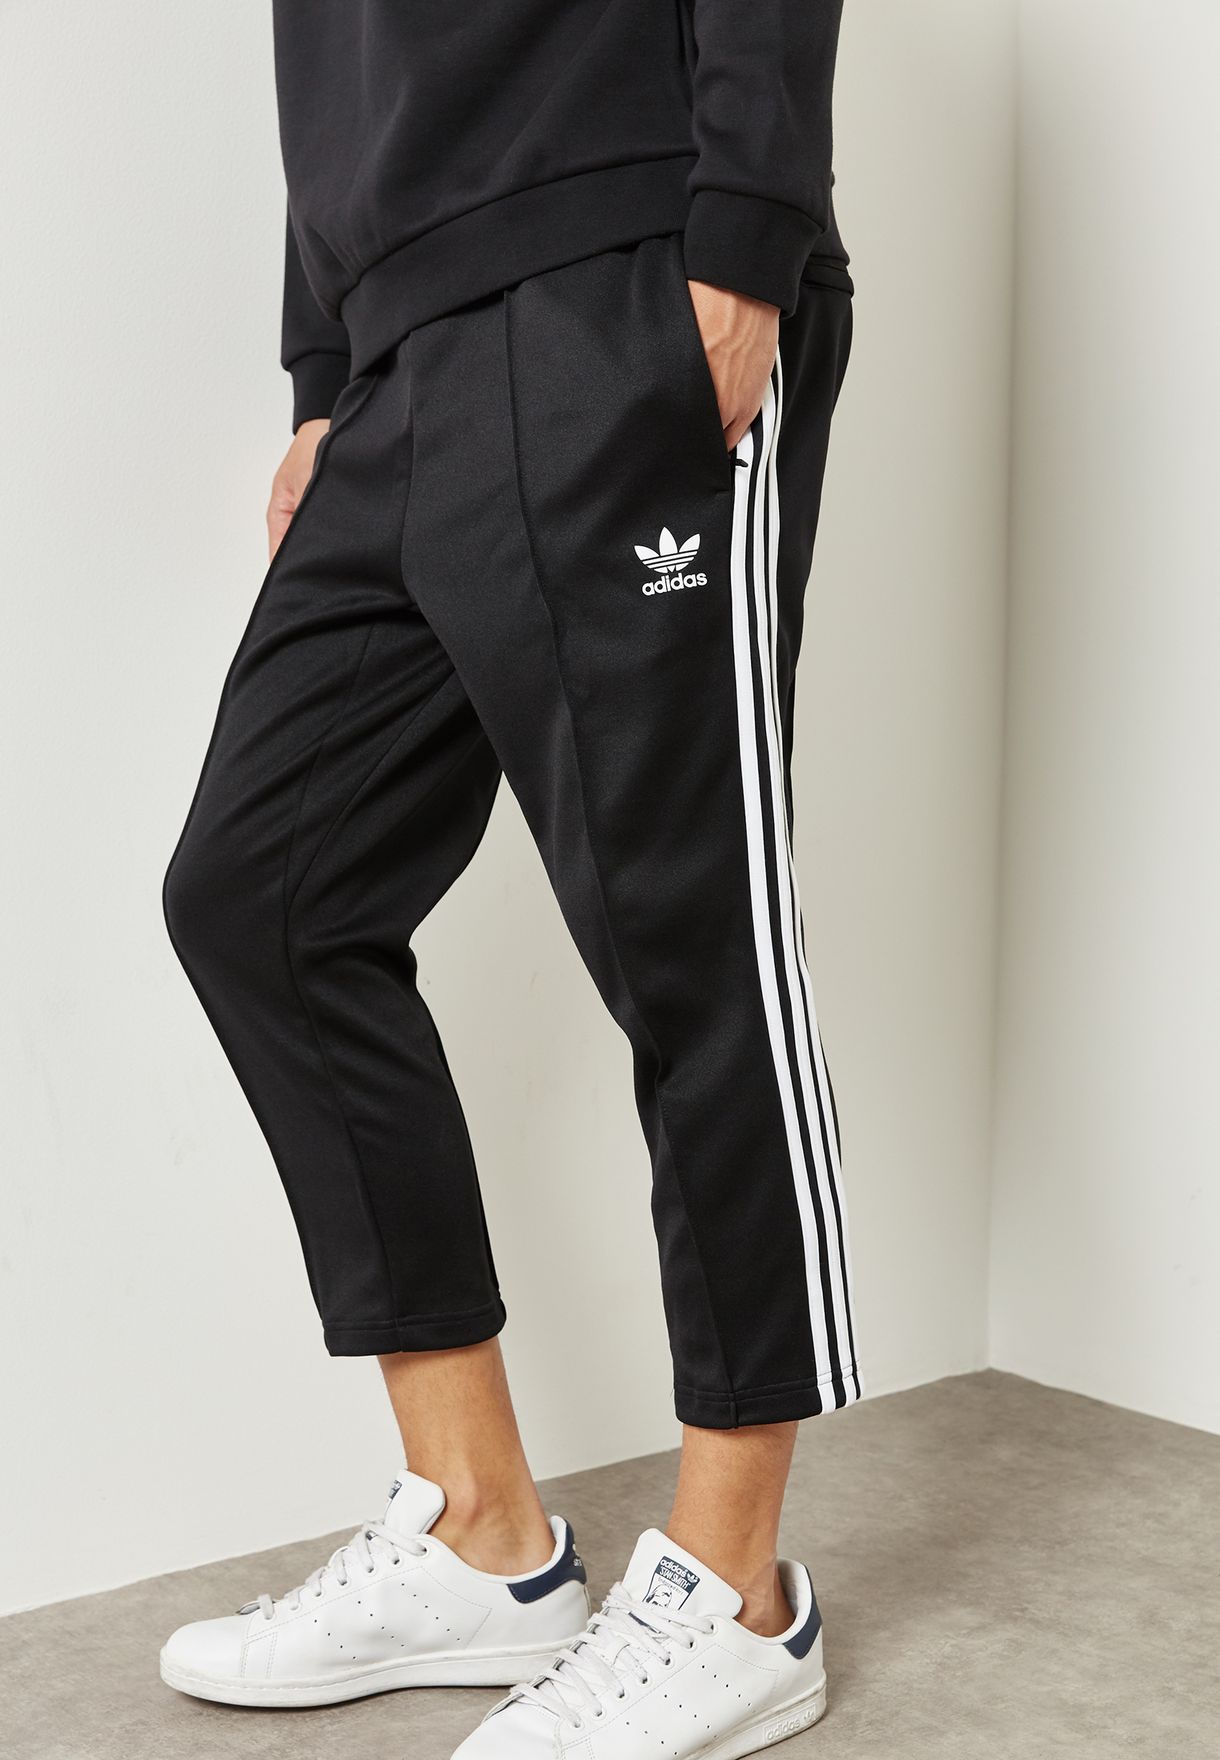 adidas superstar cropped pants